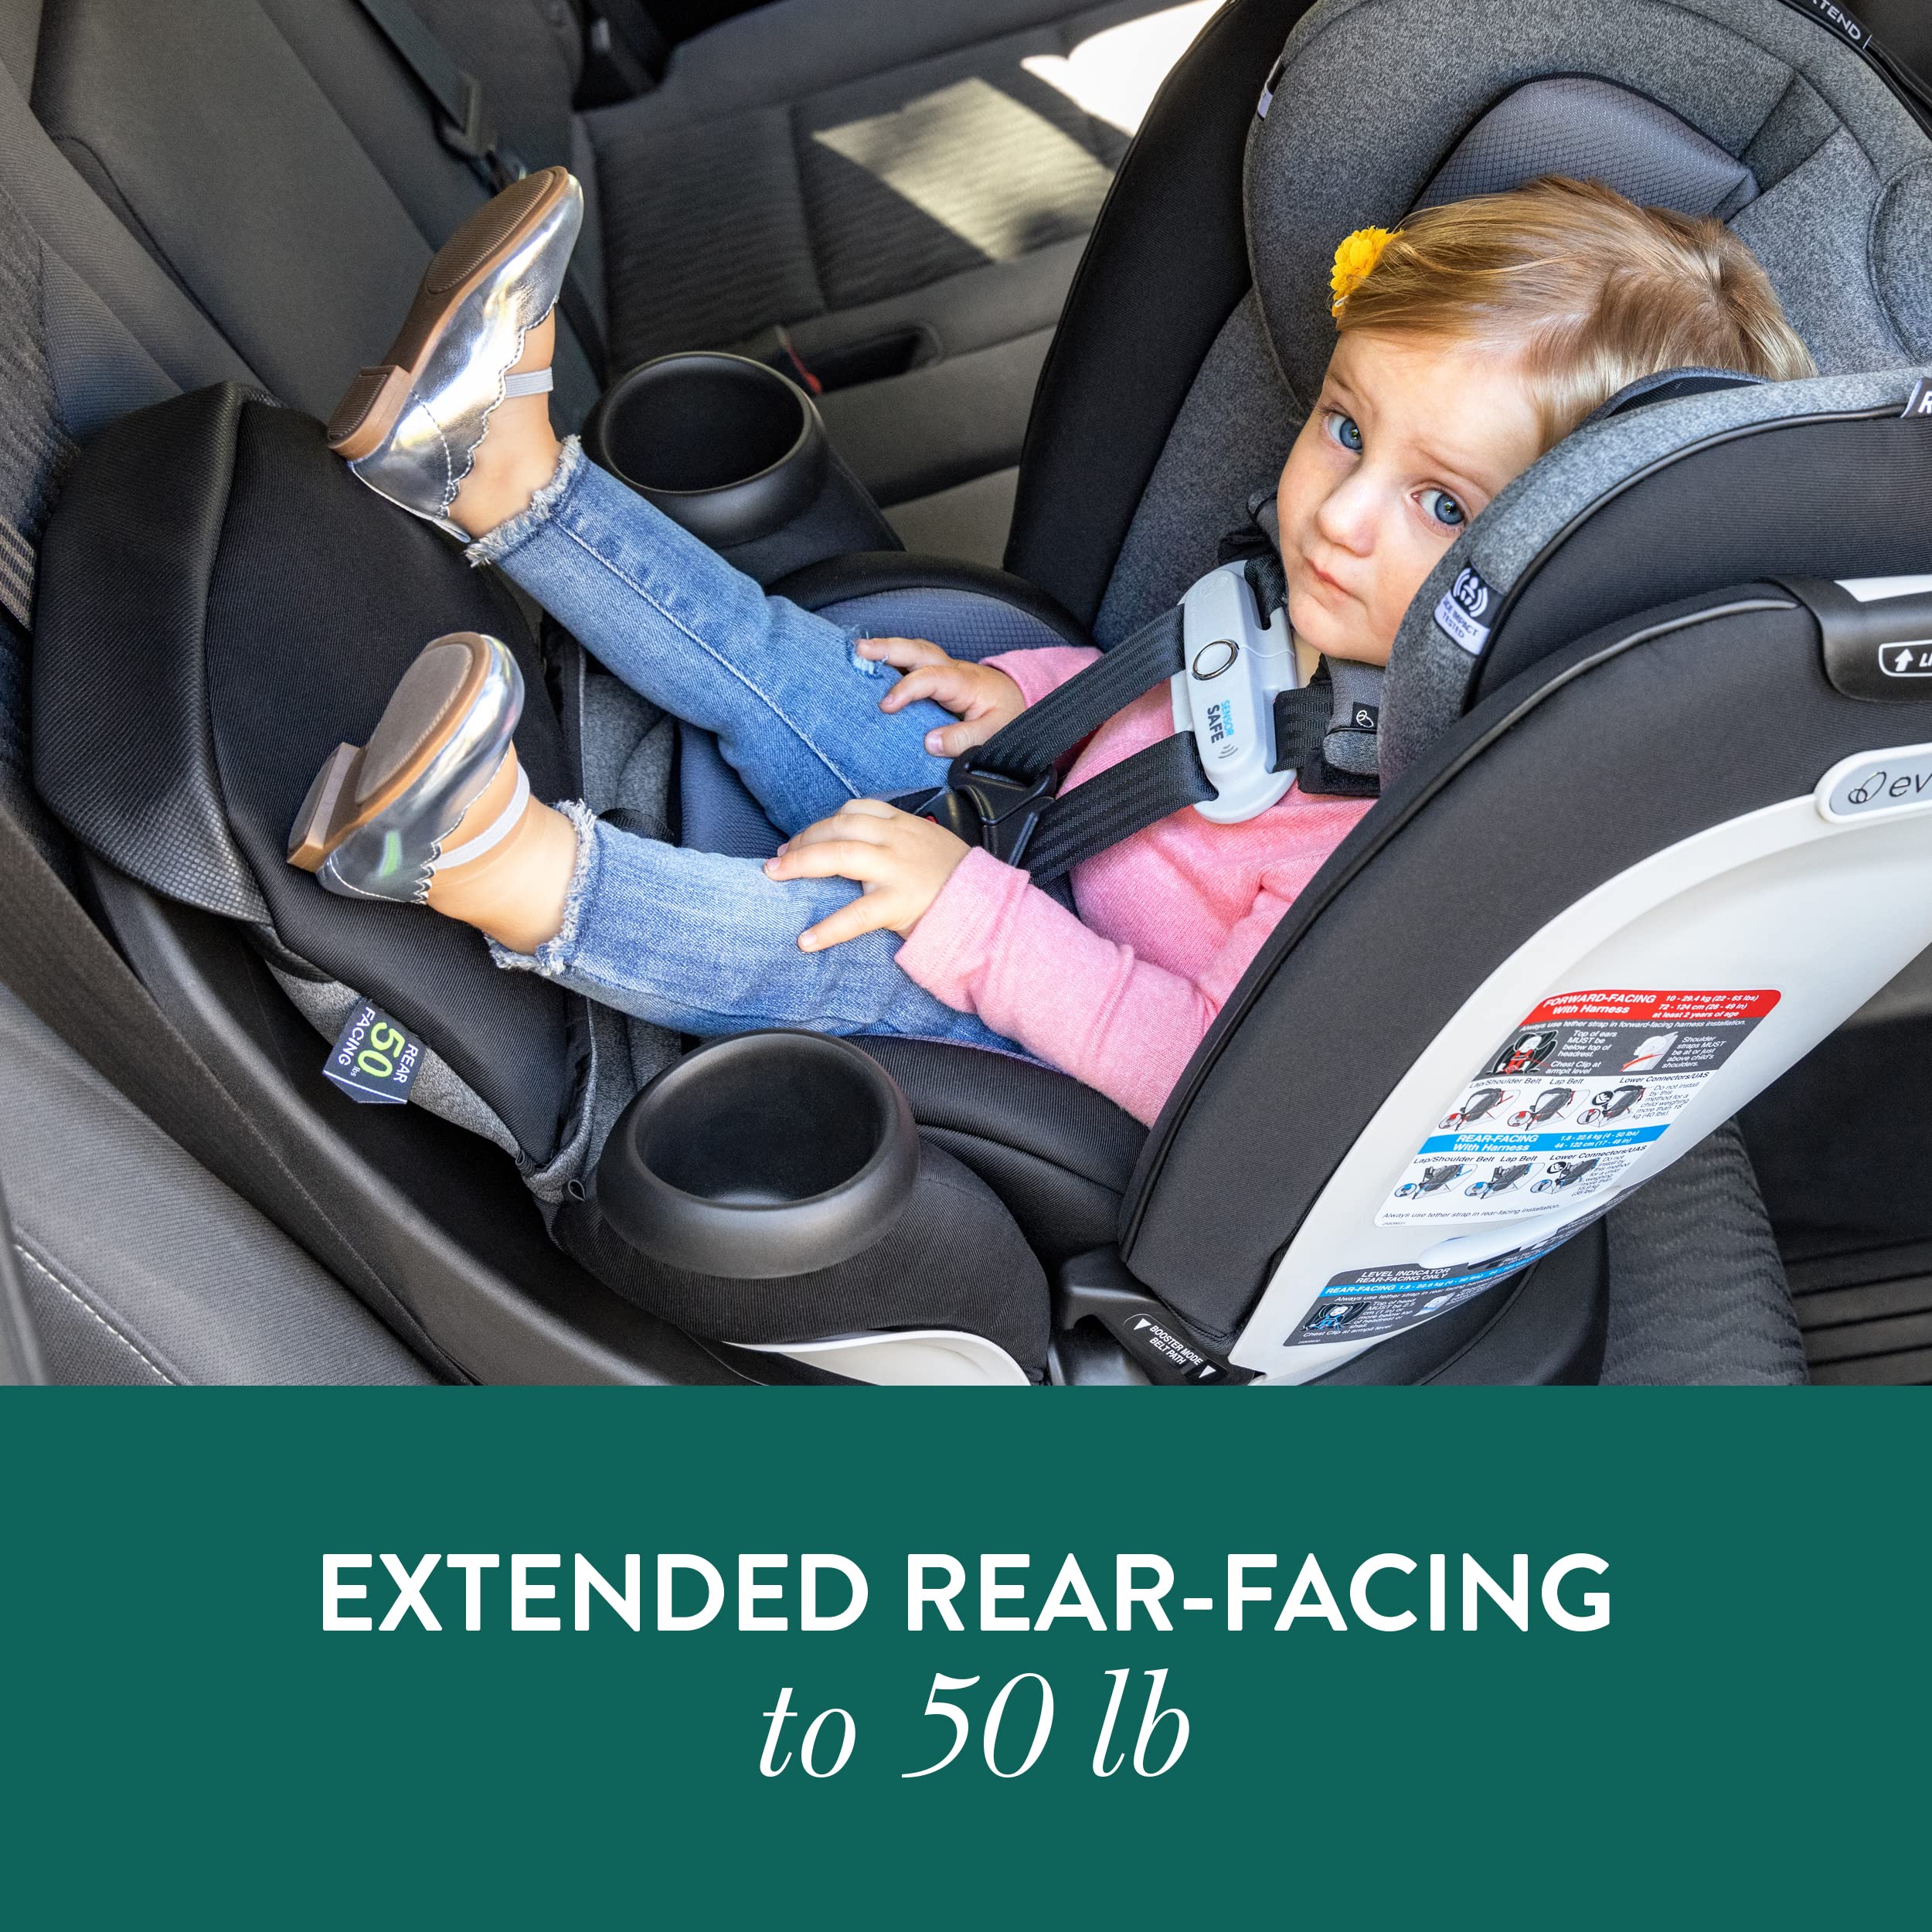 Evenflo Gold Revolve360 Extend All-in-One Rotational Car Seat with Green & Gentle Fabric (Emerald Green)